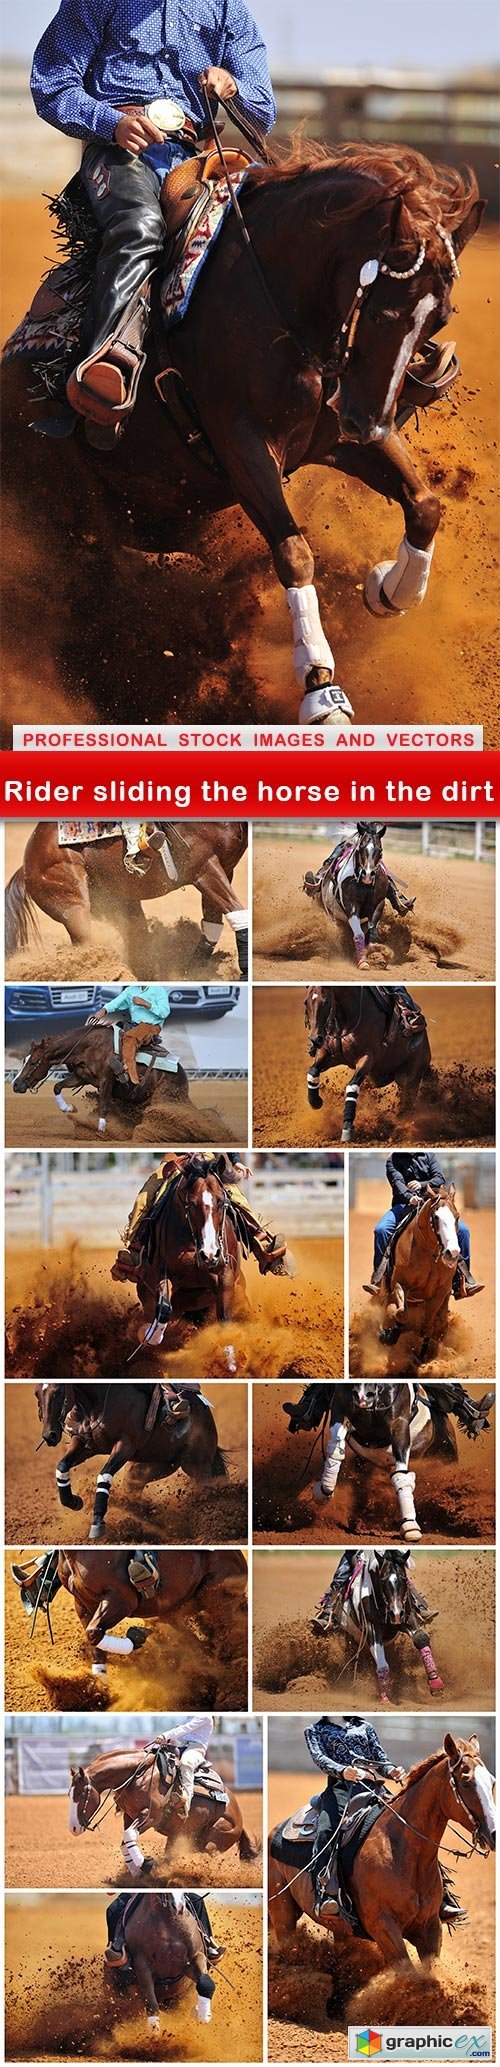 Rider sliding the horse in the dirt - 14 UHQ JPEG